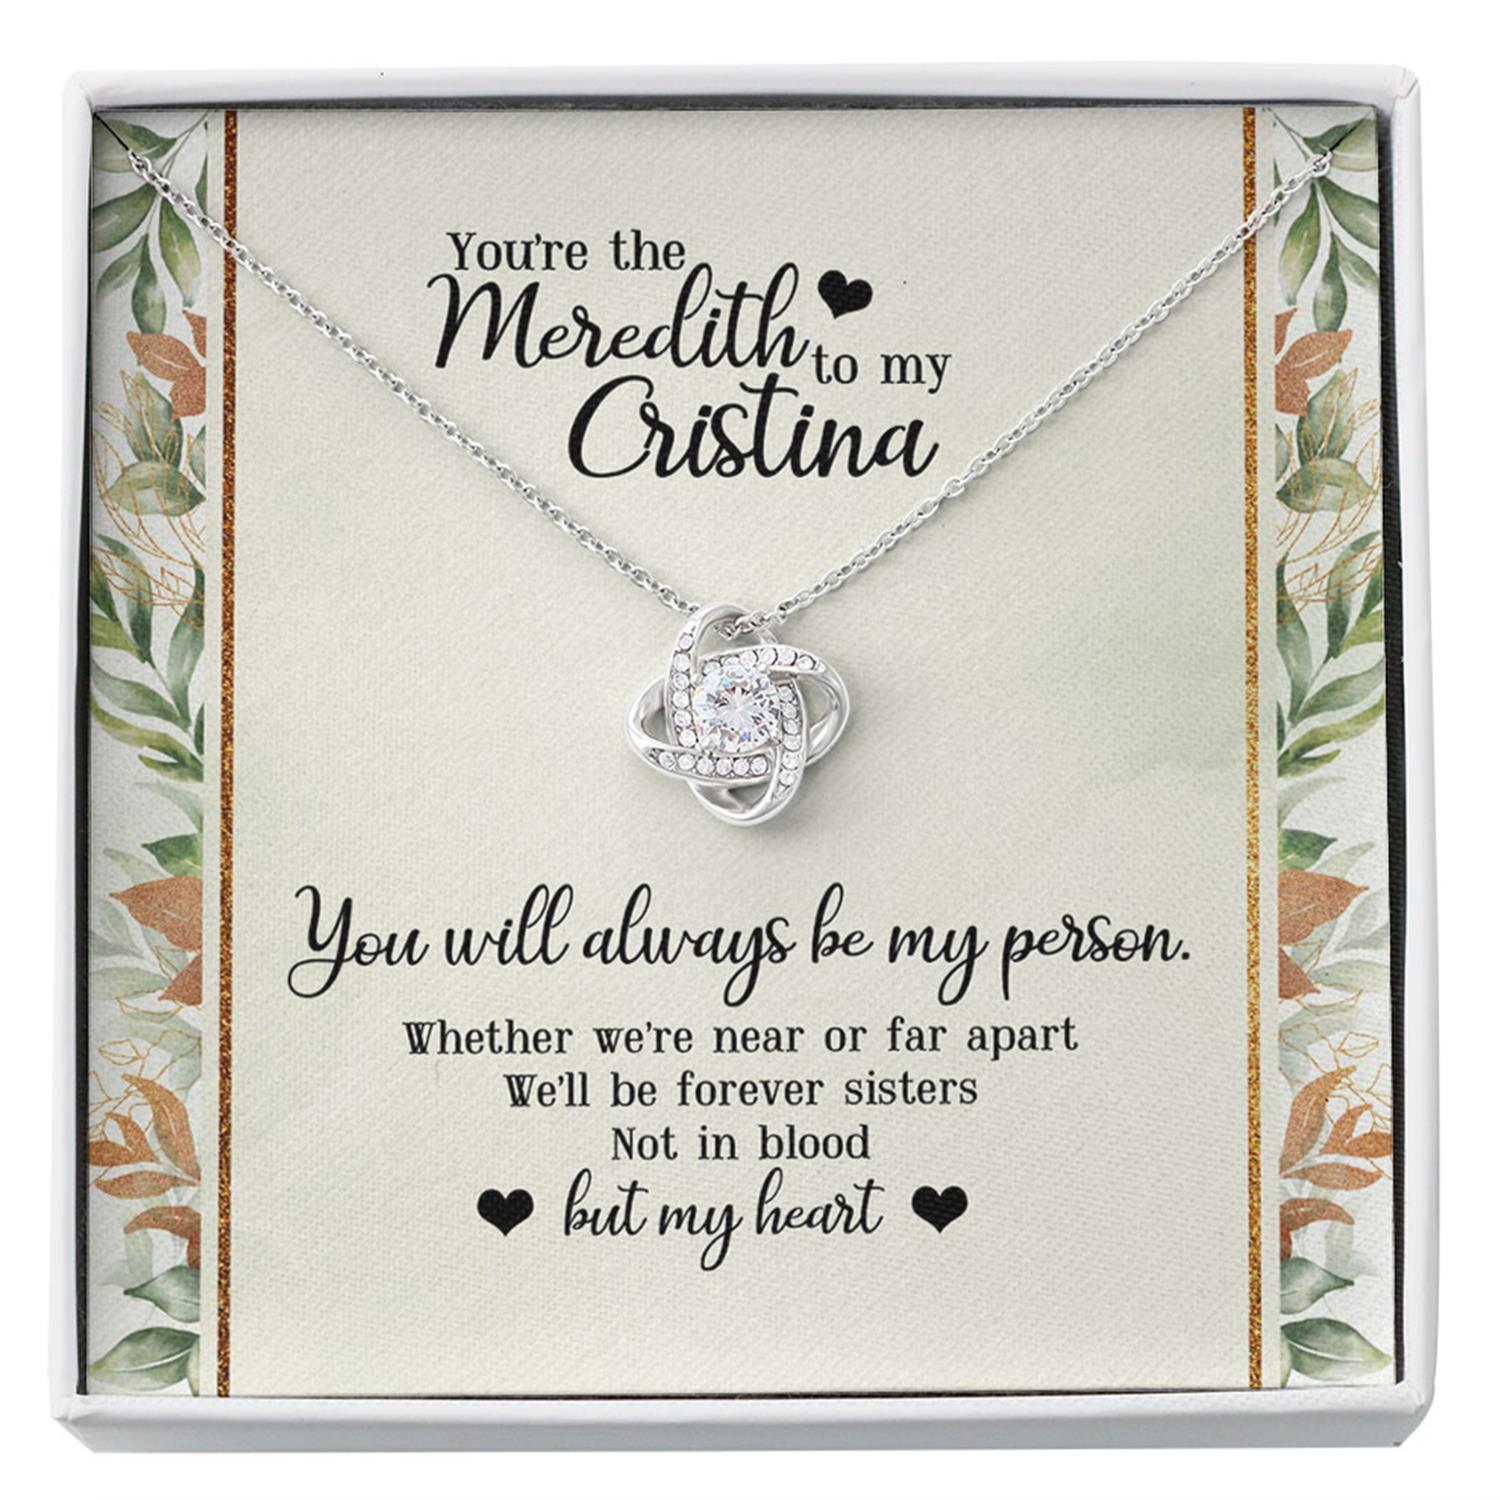 Best Friend Necklace Gift, Soul Sister Gift, Best Friend Necklace, Friendship Gift Custom Necklace